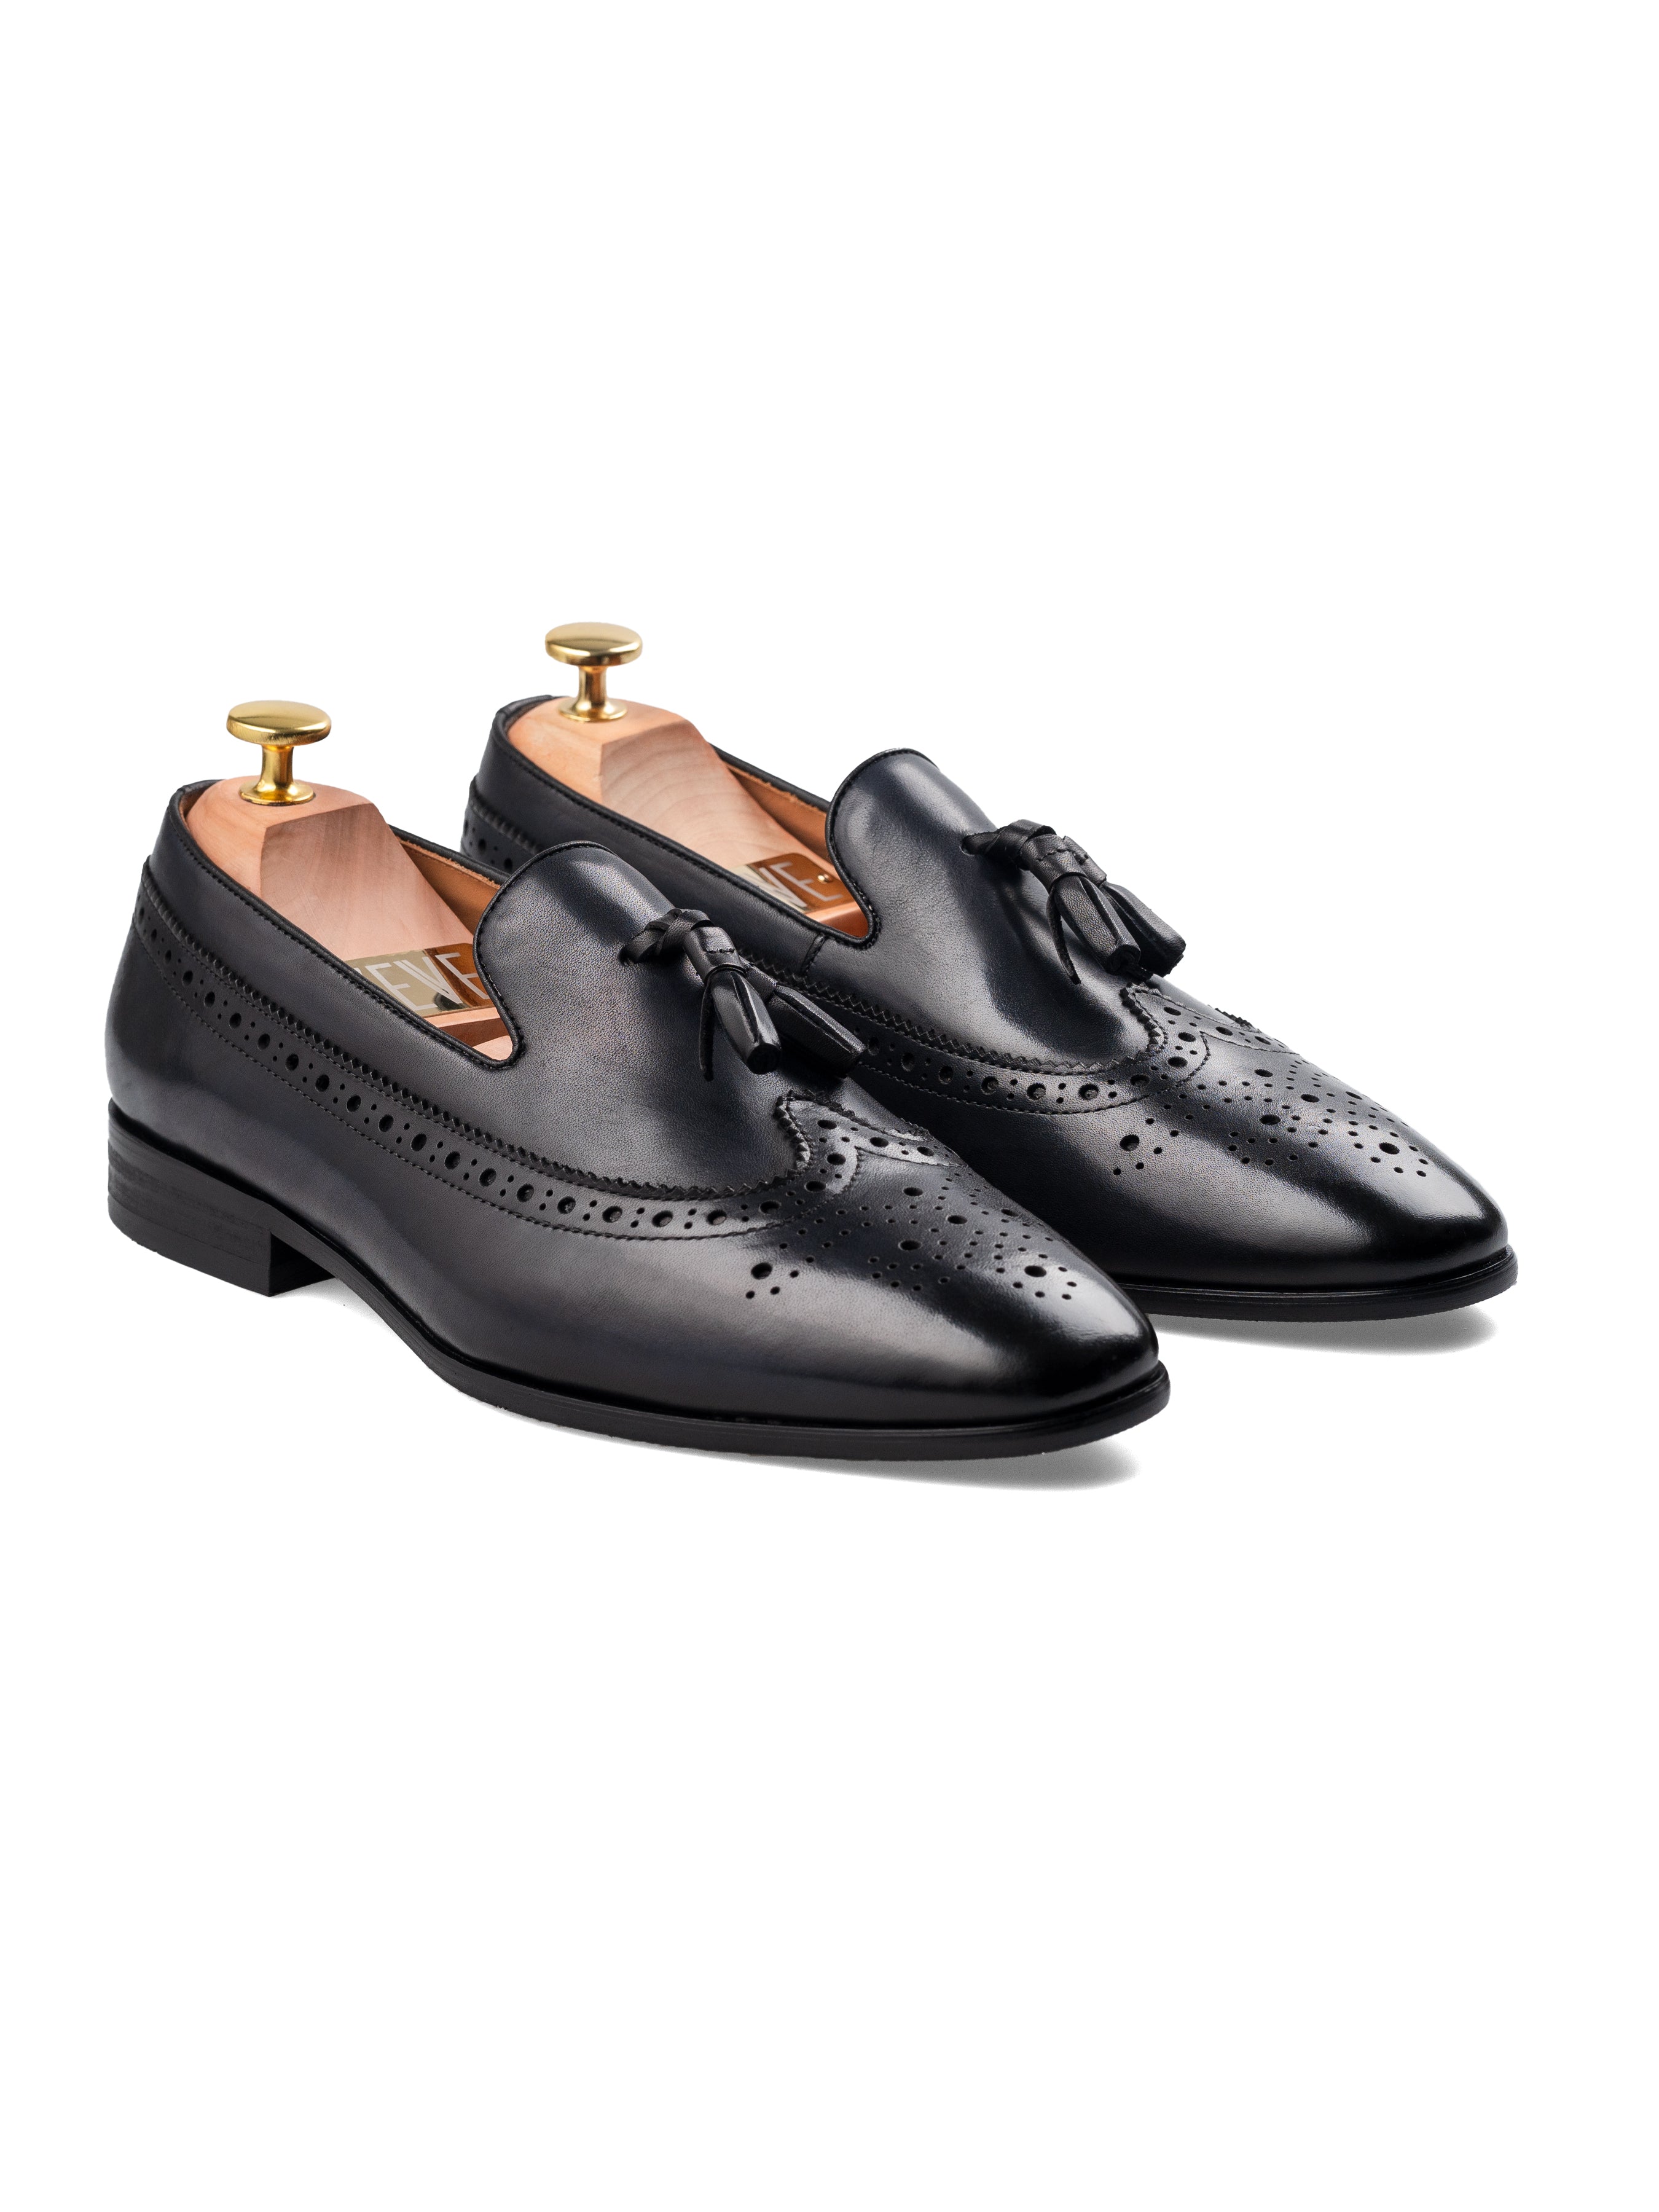 Loafer Slipper Longwing Brogue - Black Grey with Tassel (Hand Painted Patina)